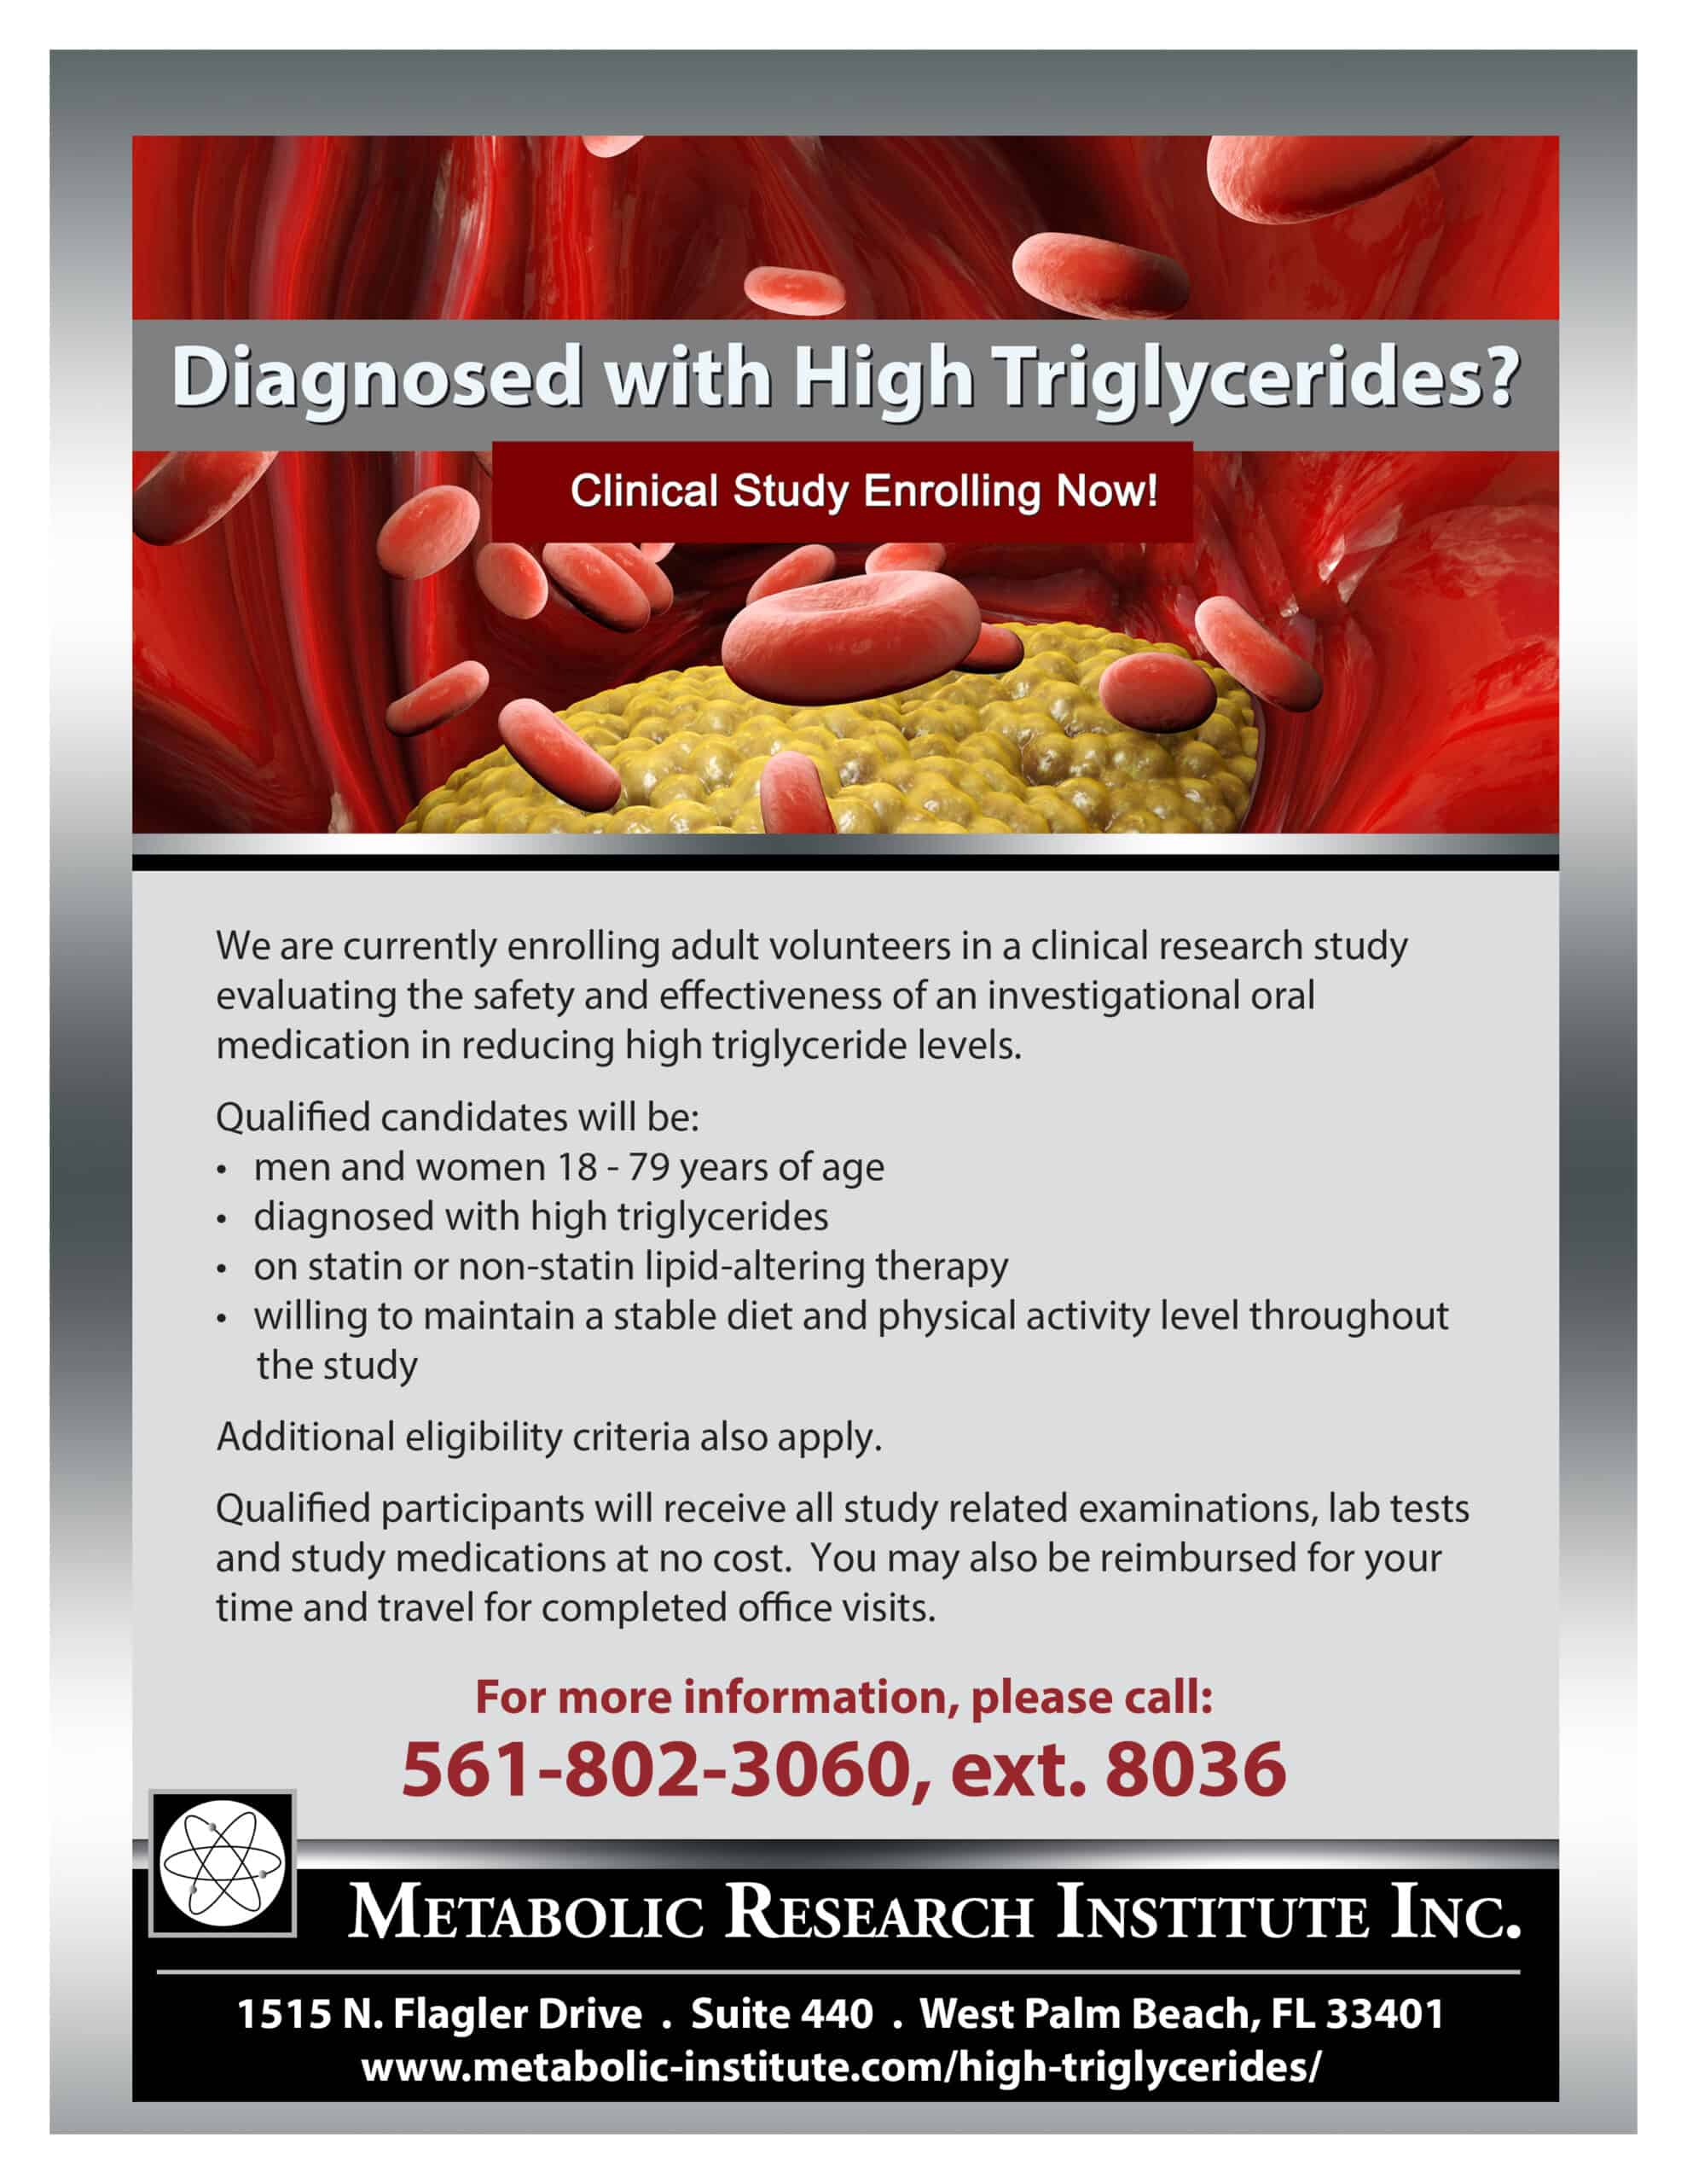 Clinical study flyer for adults with high triglyceride levels.